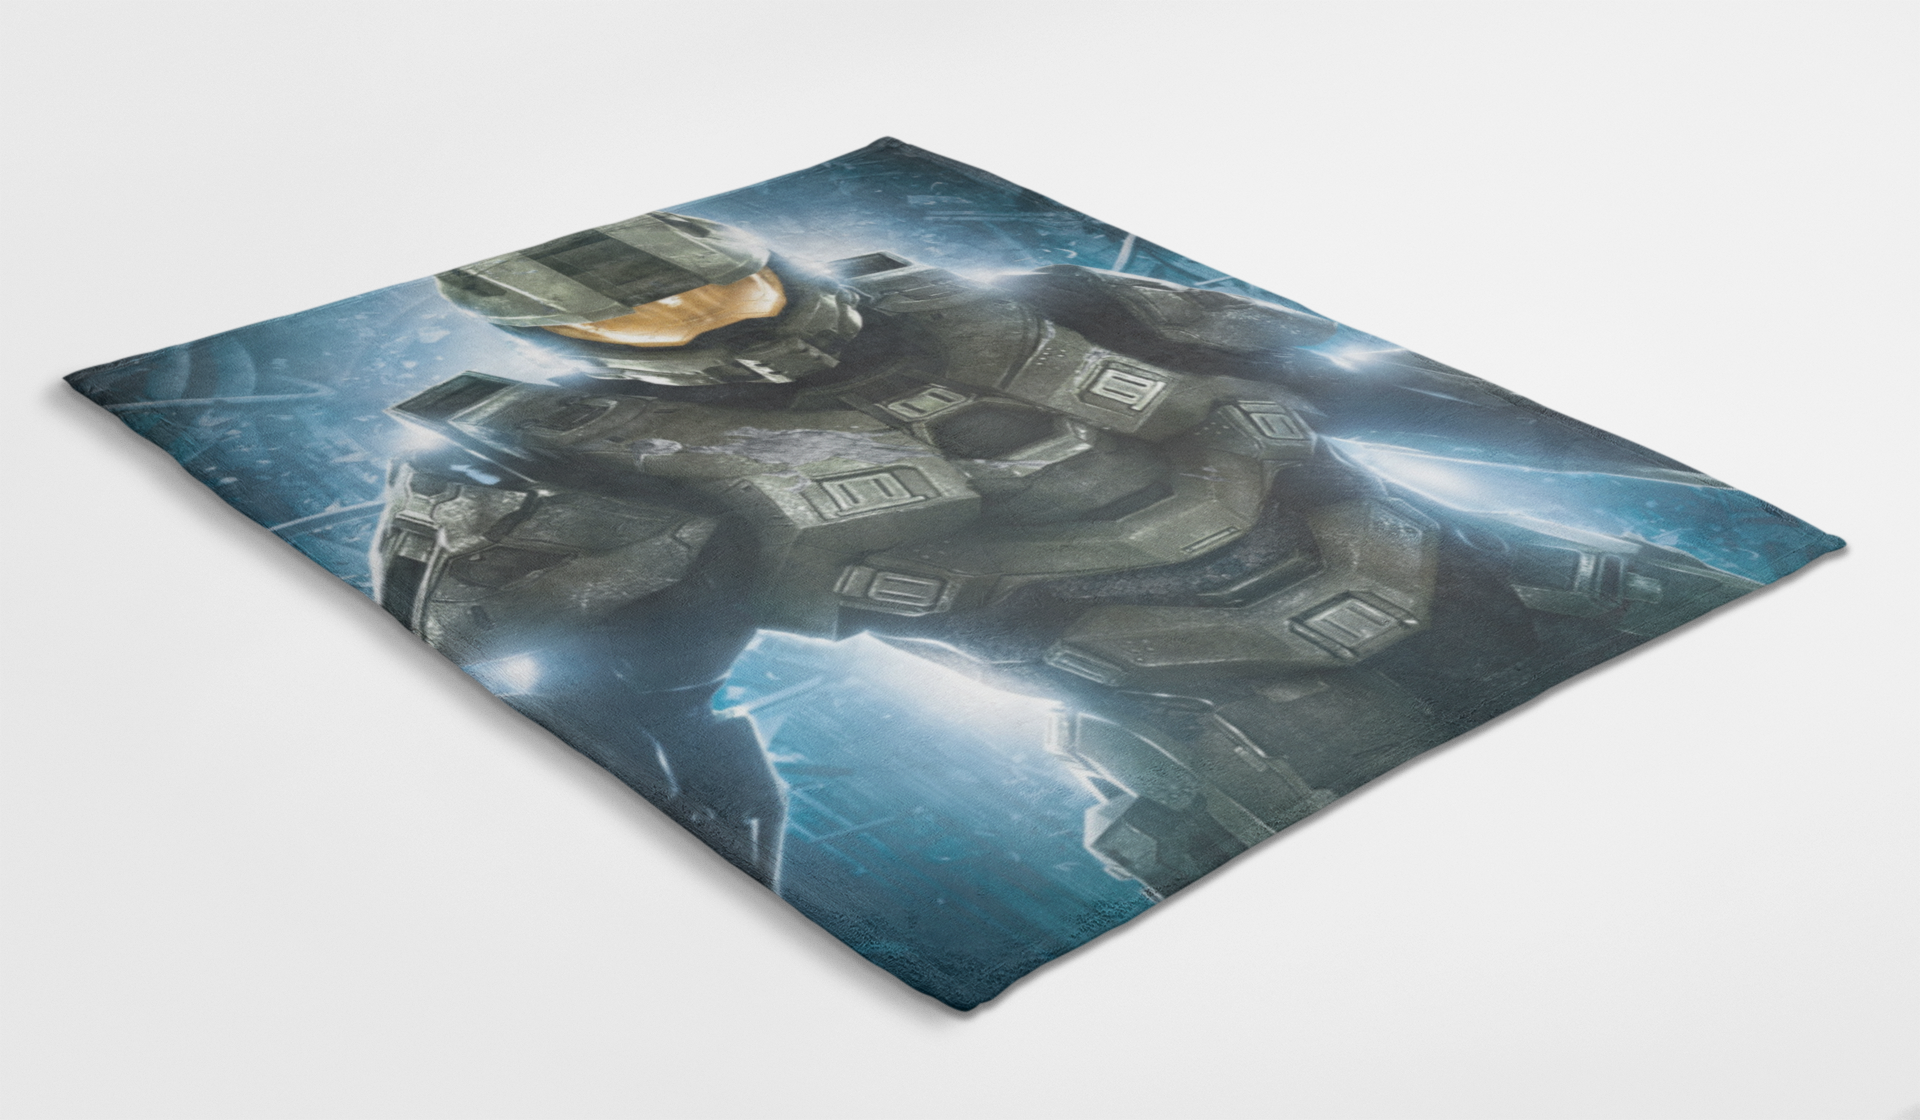 Halo 4 Master Chief Poster Blanket